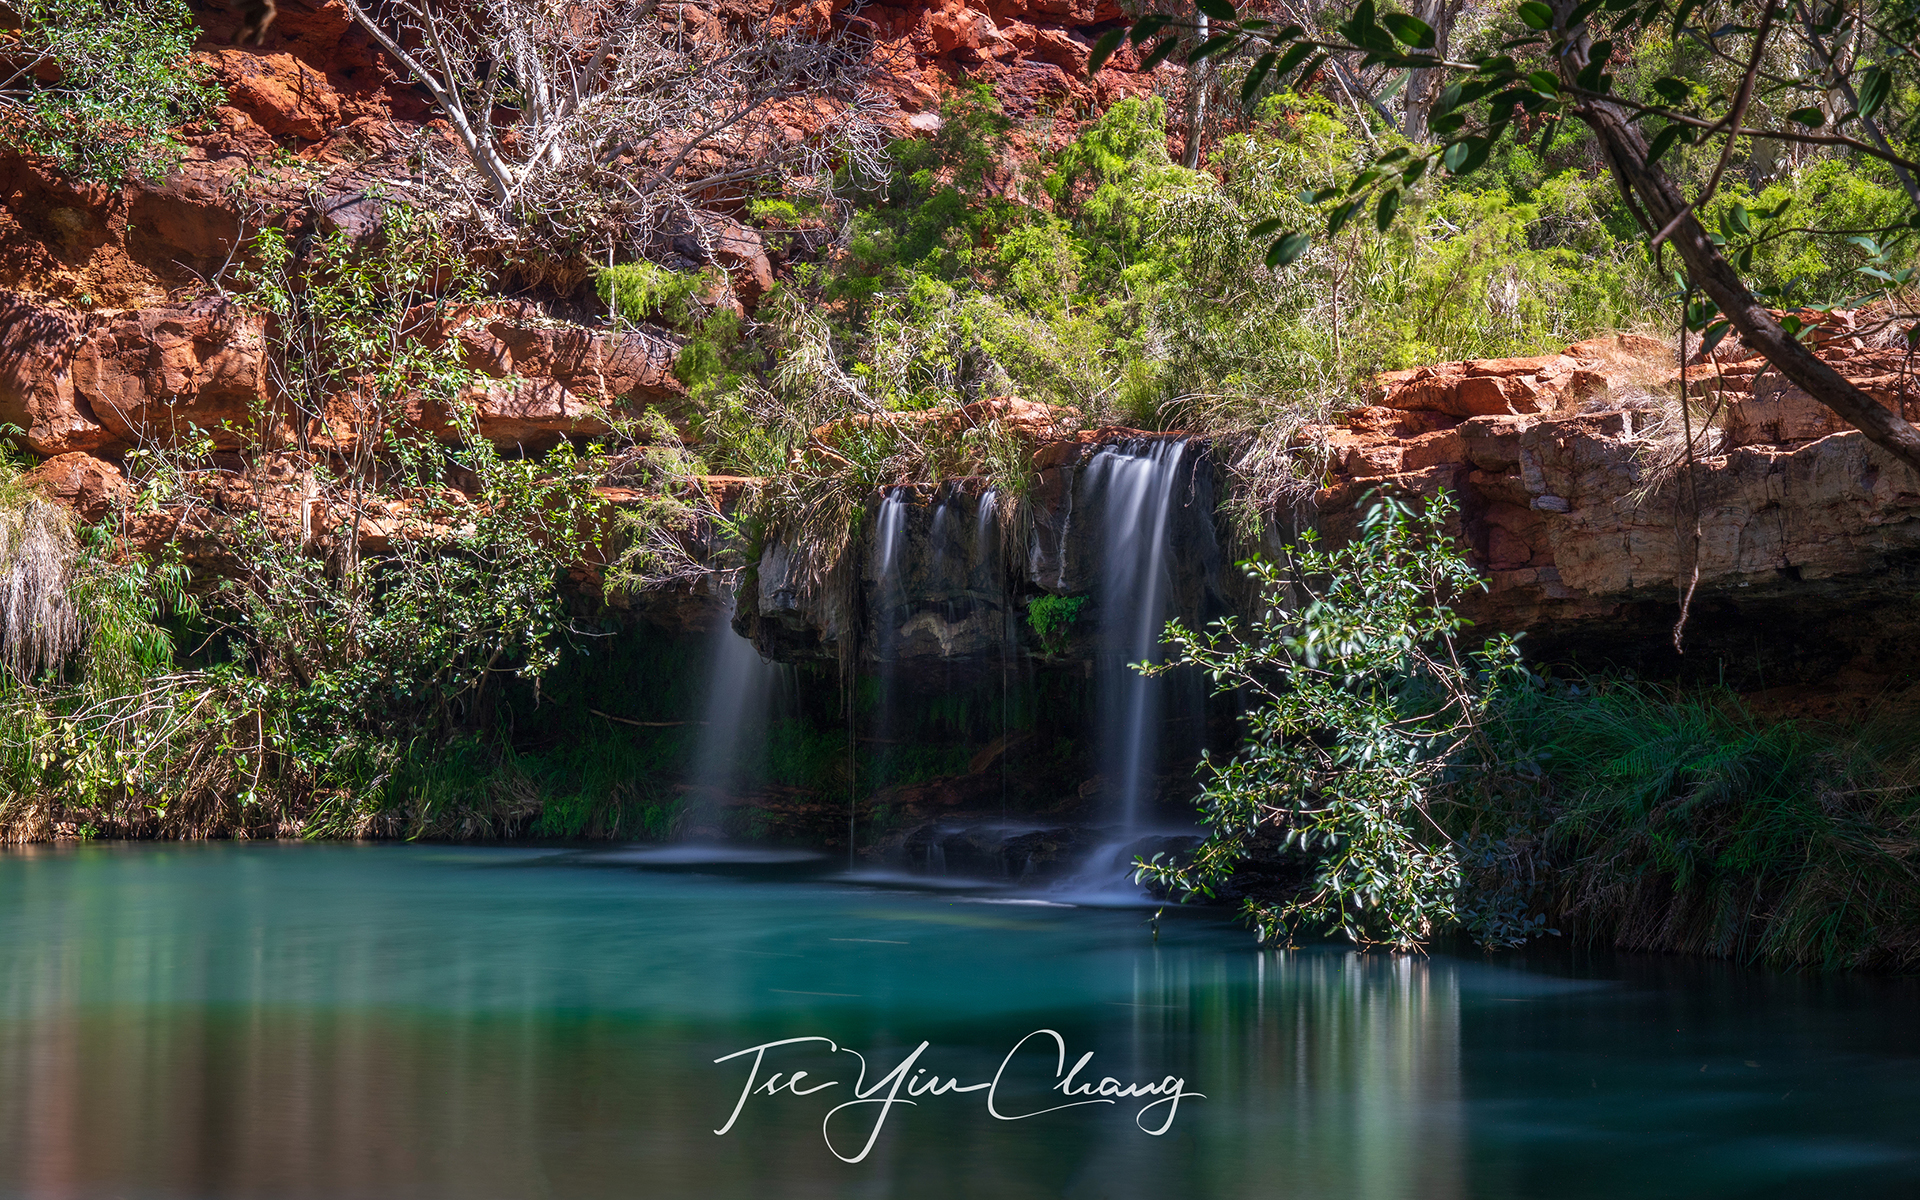 Sheltered from the worst of the sun and irrigated by the emerald river water, Fern Pool is a refuge of life which contrasts with the arid country at the top of the cliffs